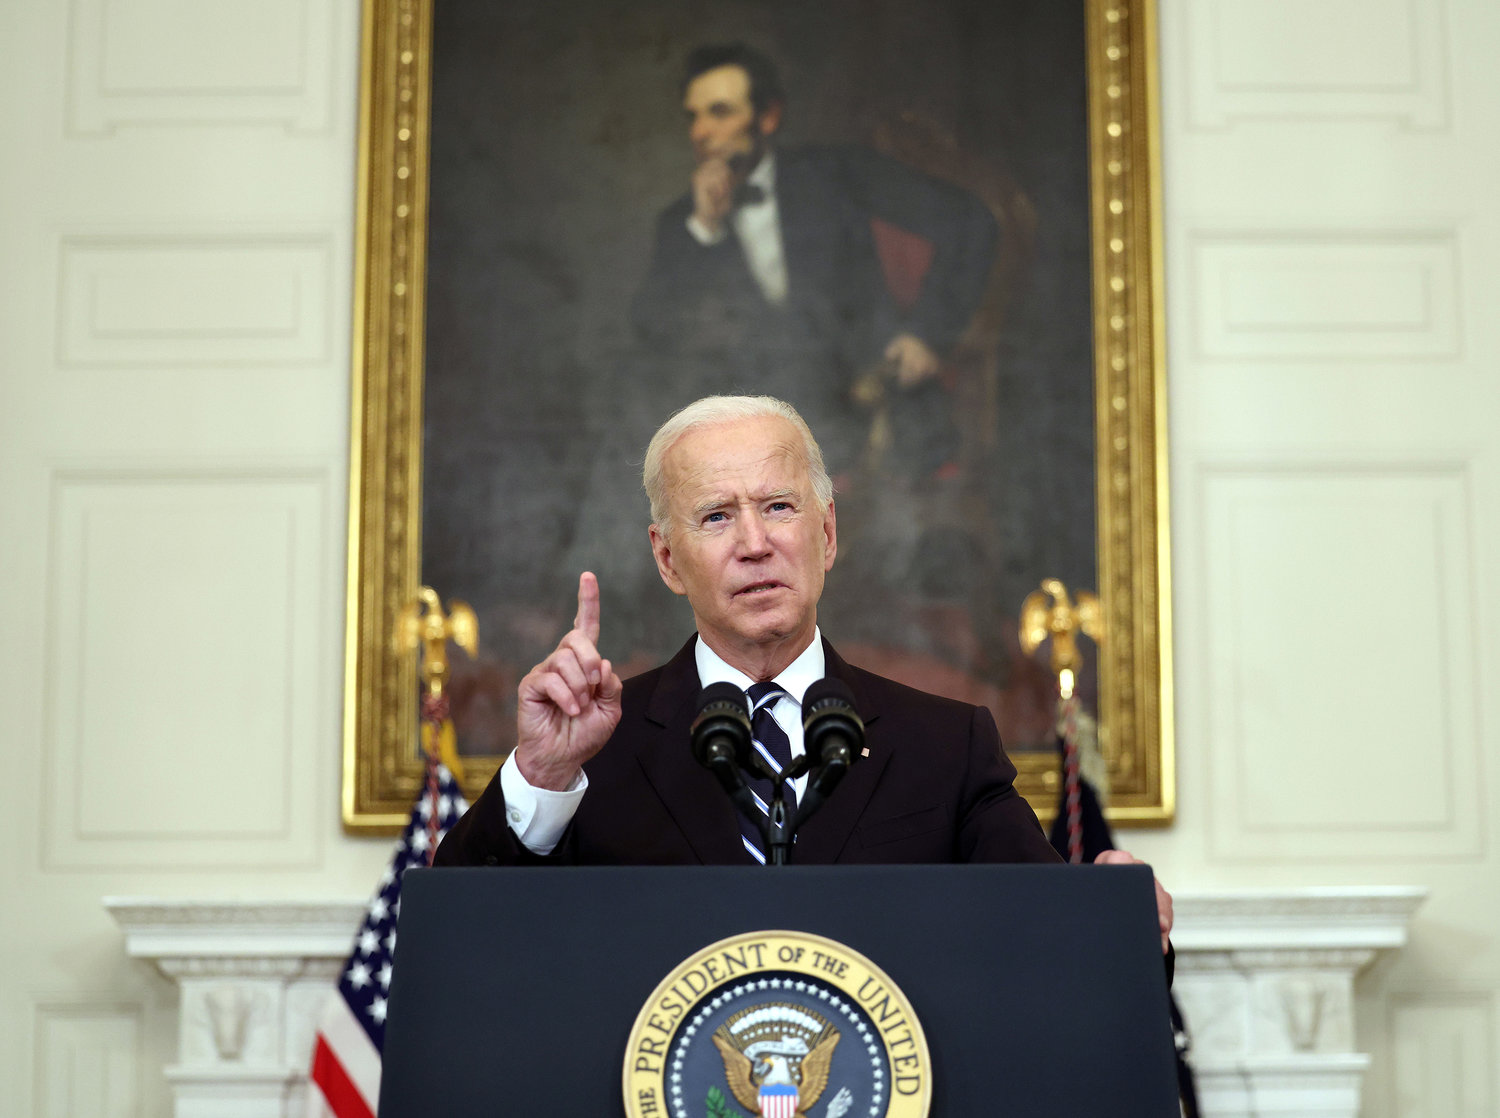 President Joe Biden speaks about combating the coronavirus pandemic, in the State Dining Room of the White House on Thursday, Sept. 9, 2021 in Washington, D.C. (Kevin Dietsch/Getty Images/TNS)